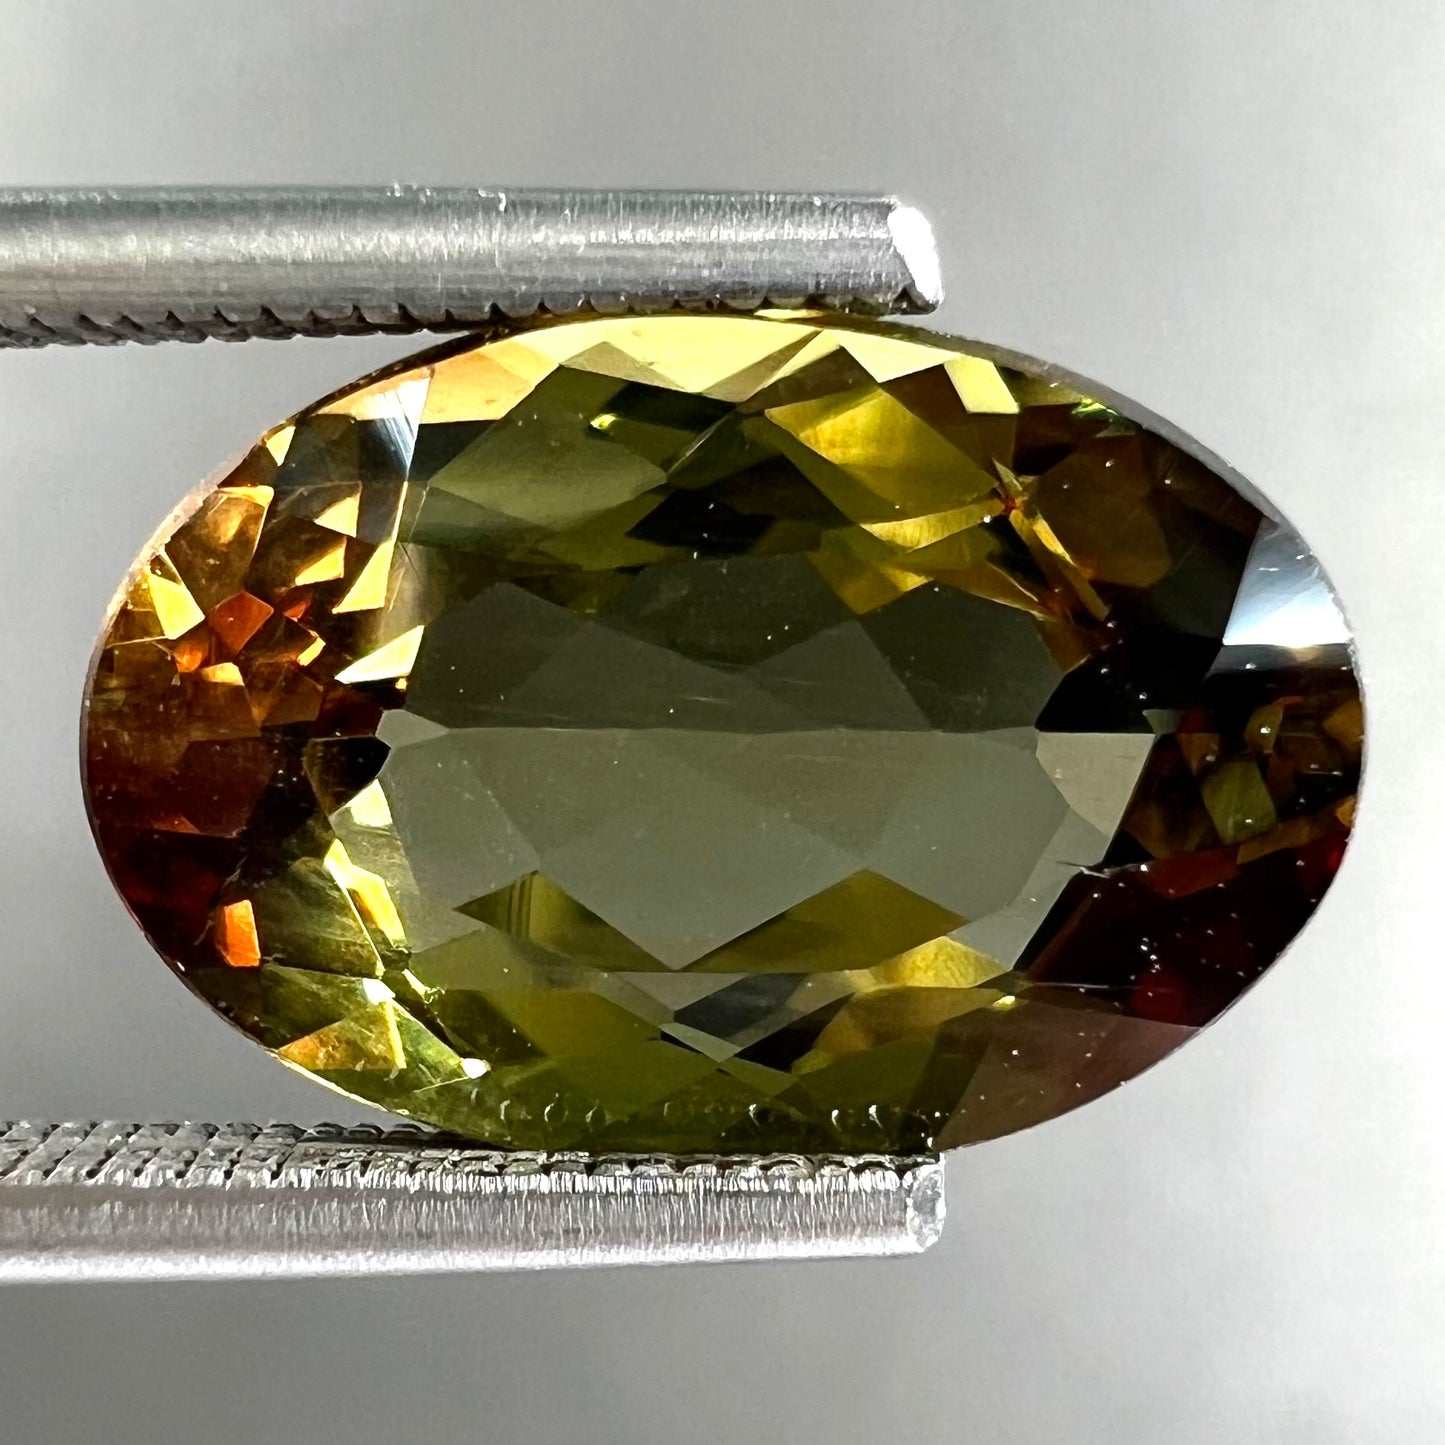 A loose, faceted oval cut andalusite gemstone.  The stone shows brown and green colors.